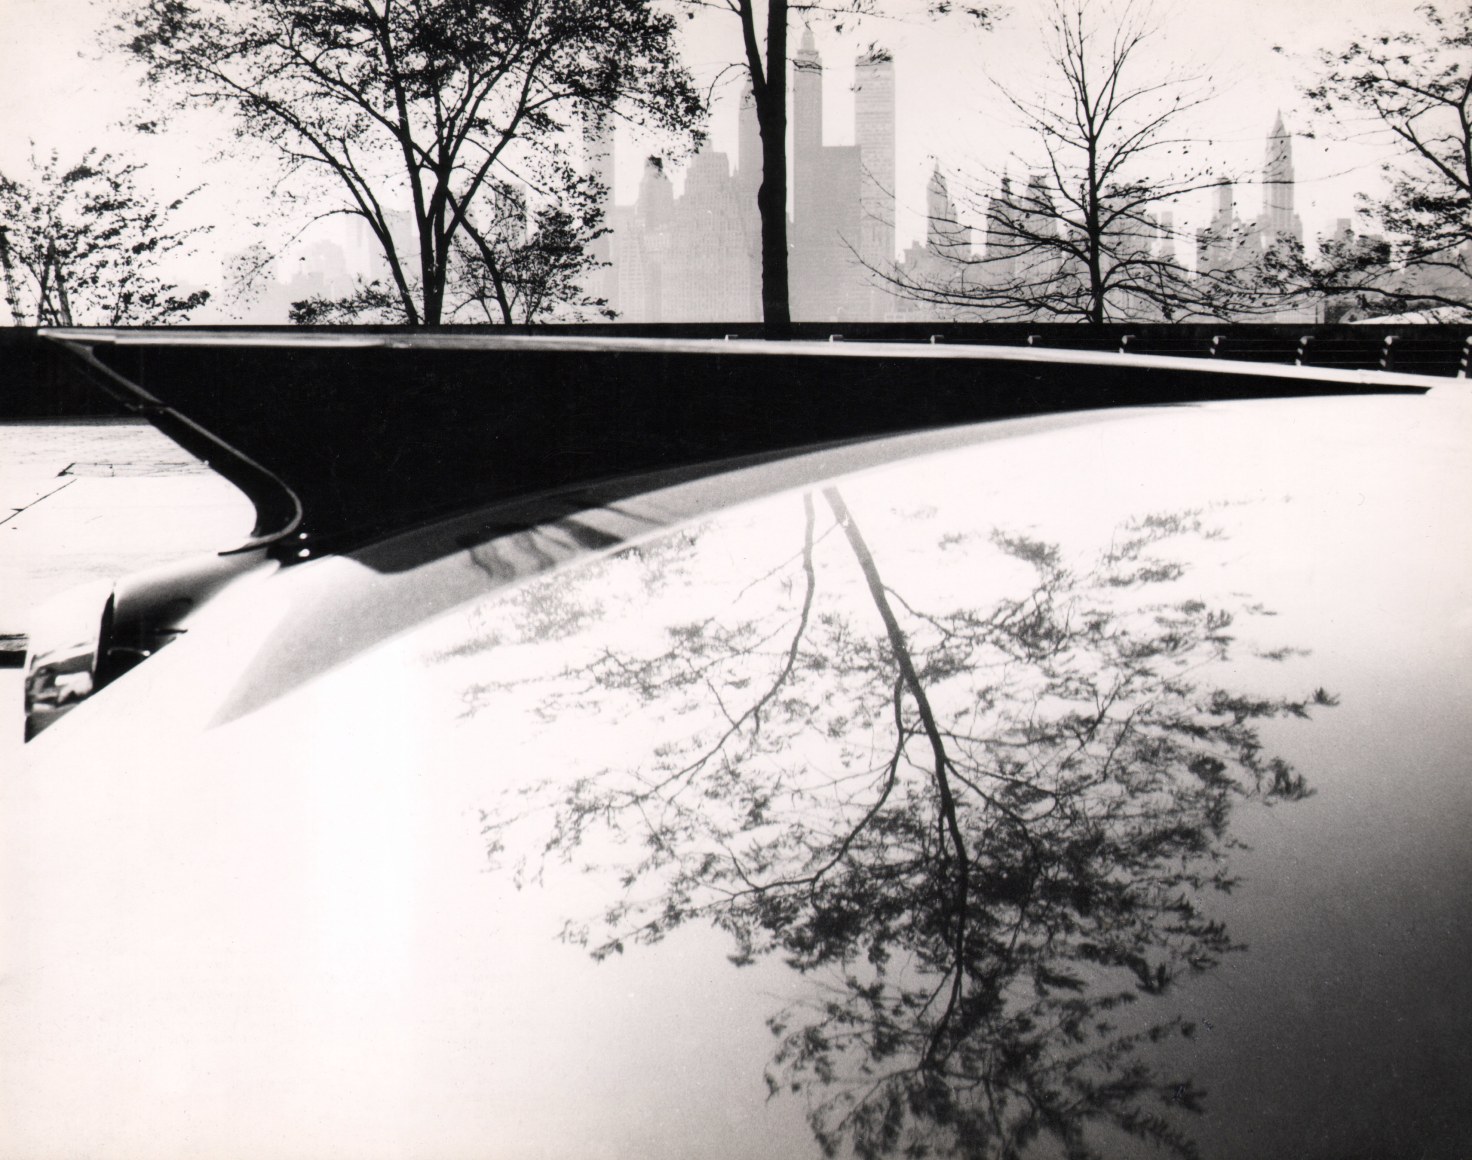 11. Jan Lukas, Untitled, ​1964. Foreground detail of a car's surface reflecting a tree. City skyline is visible in the background.